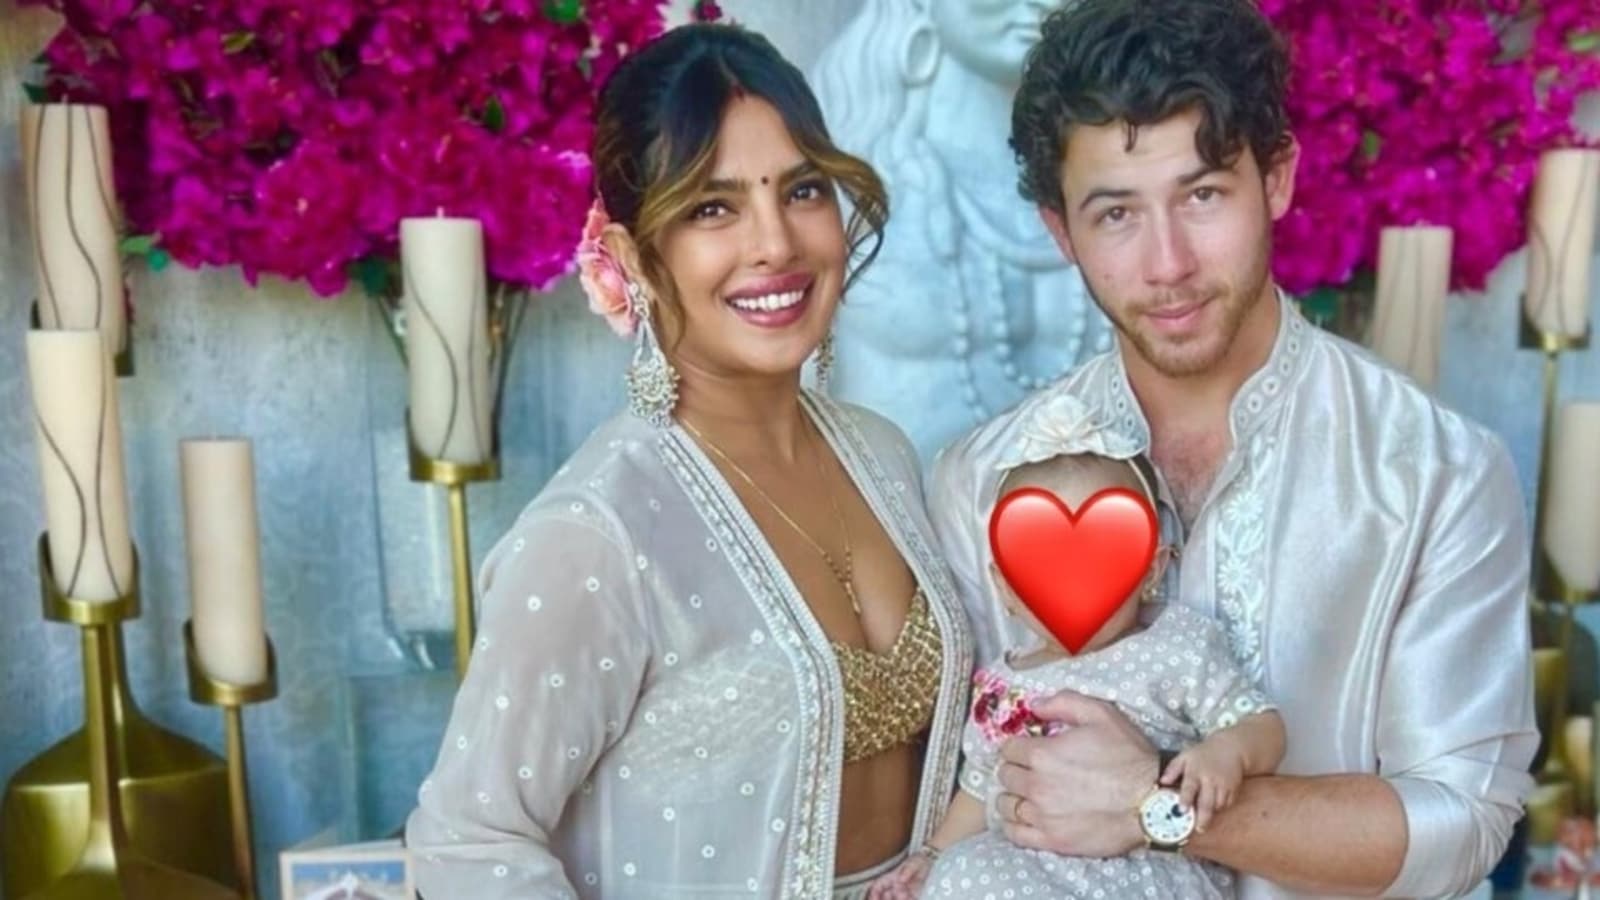 priyanka-chopra-and-nick-jonas-with-malti-deck-up-in-gorgeous-ethnic-looks-for-diwali-puja-at-los-angeles-home-all-pics